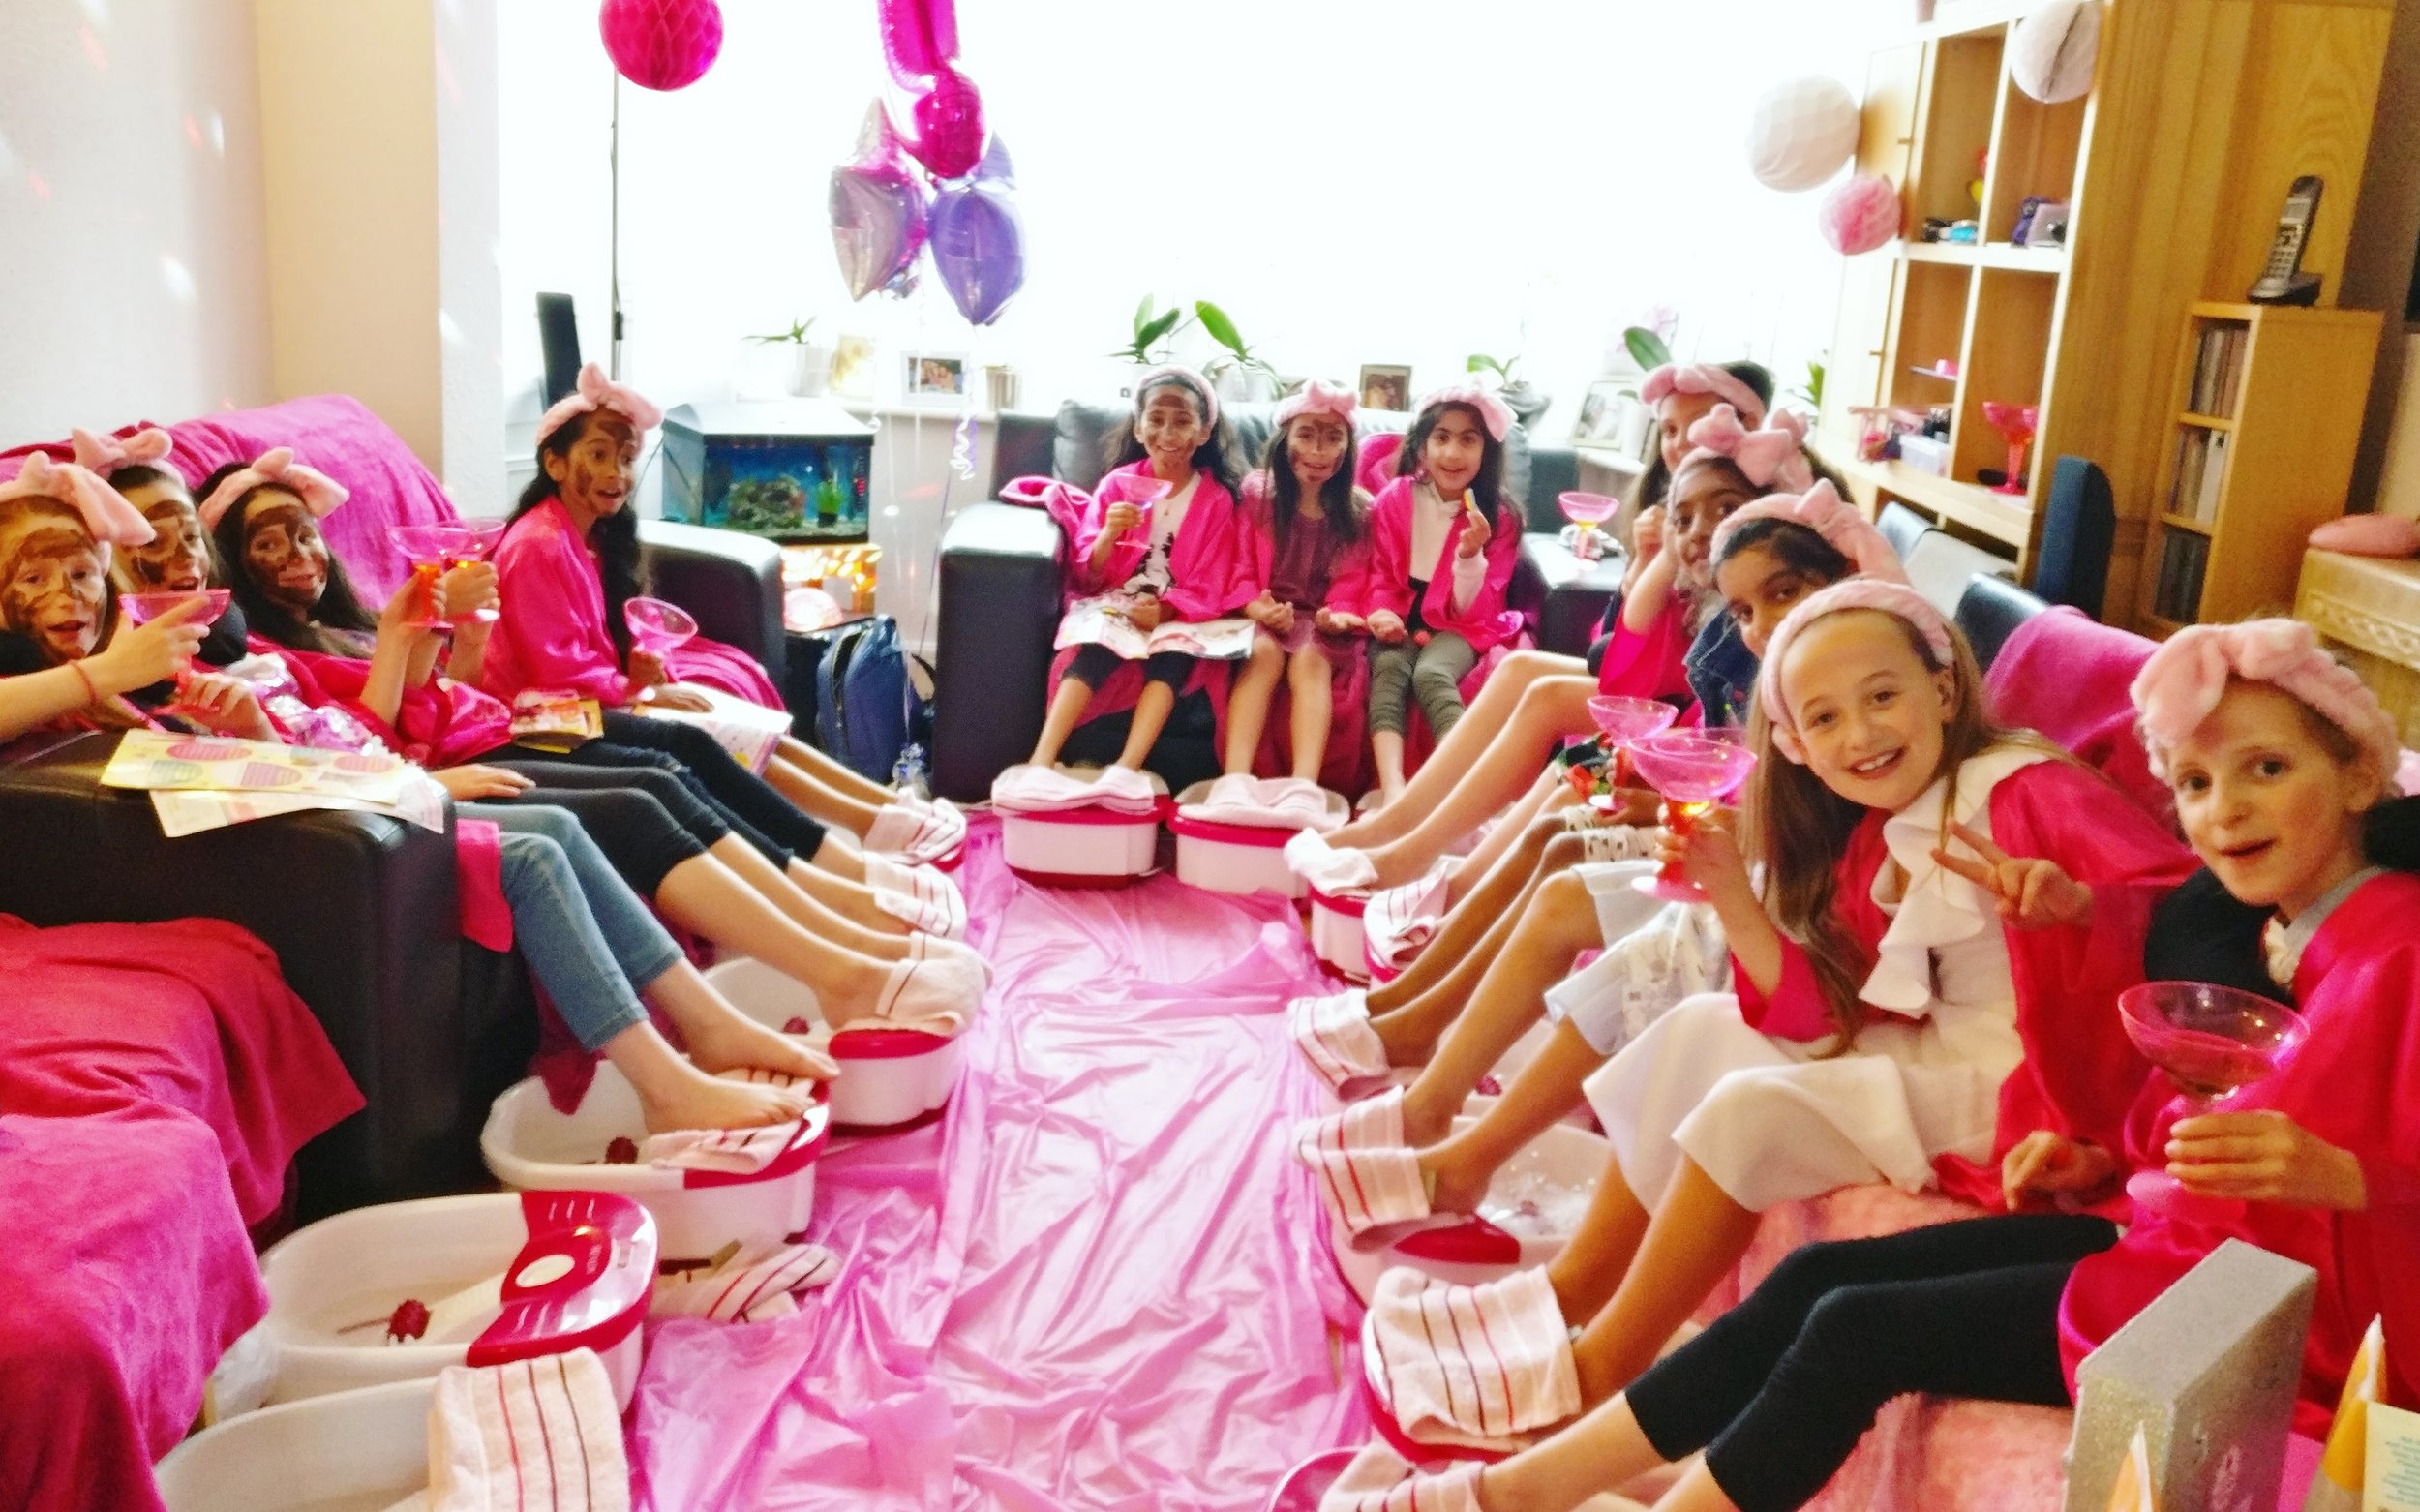 Pampering party, kids pamper party, girls pamper party ideas, children's pamper party near me, kids spa parties, childrens pamper parties, spa party for girls, pamper parties at home